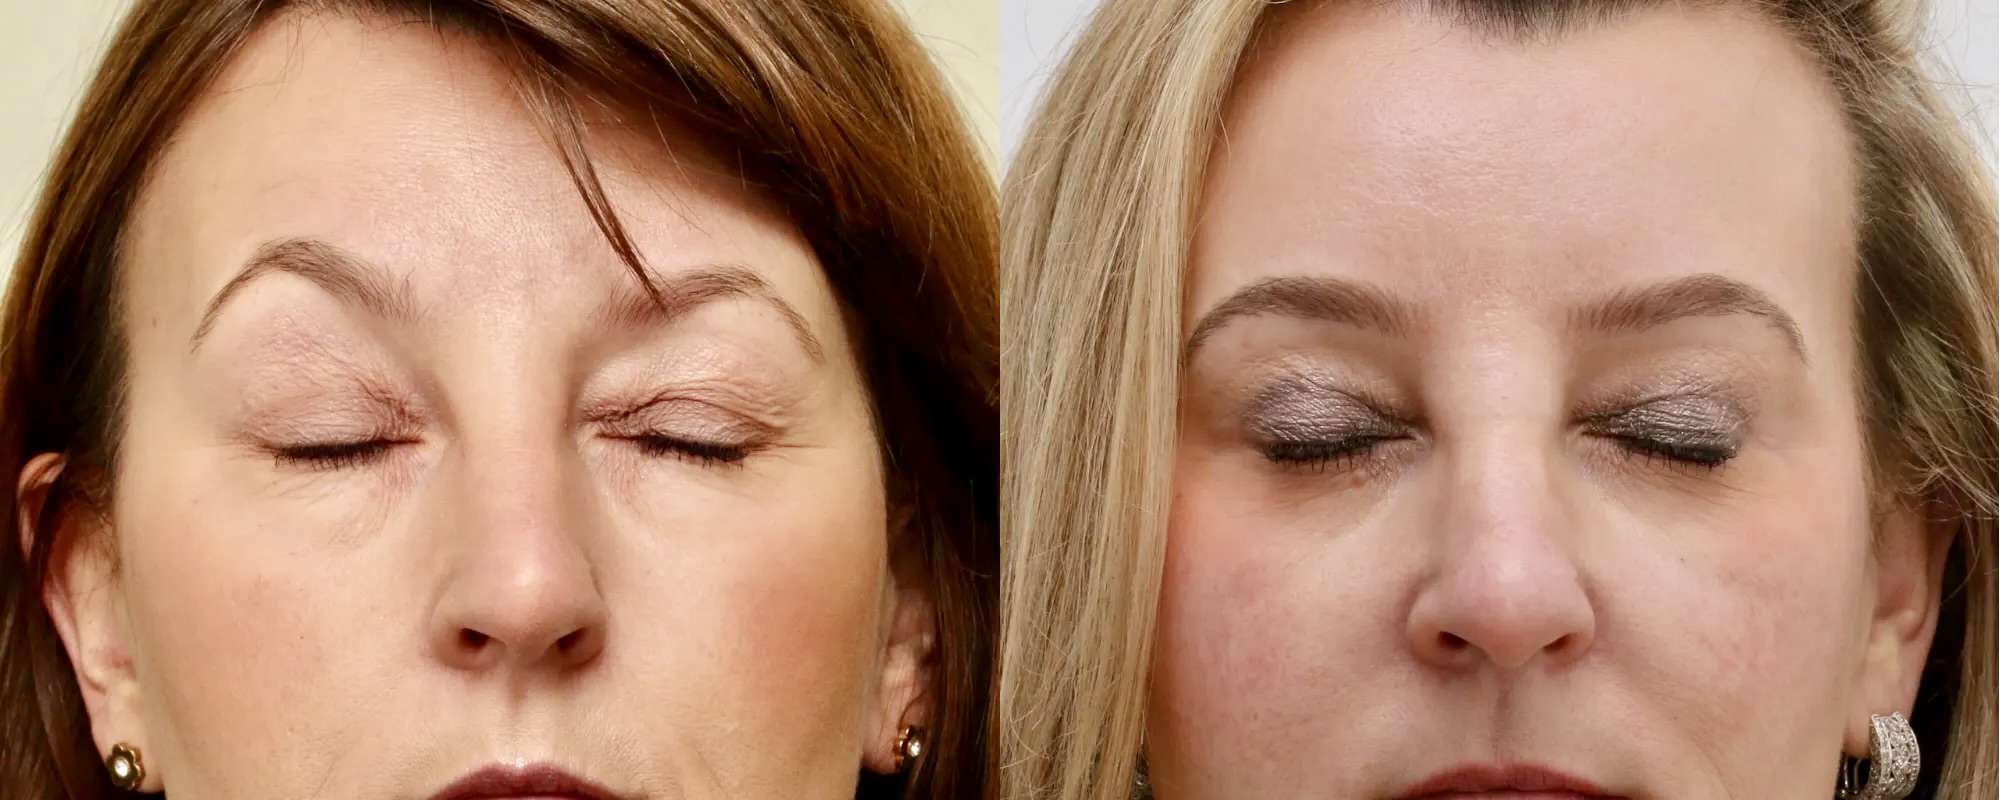 Lower and upper eyelid surgery with fat transfer